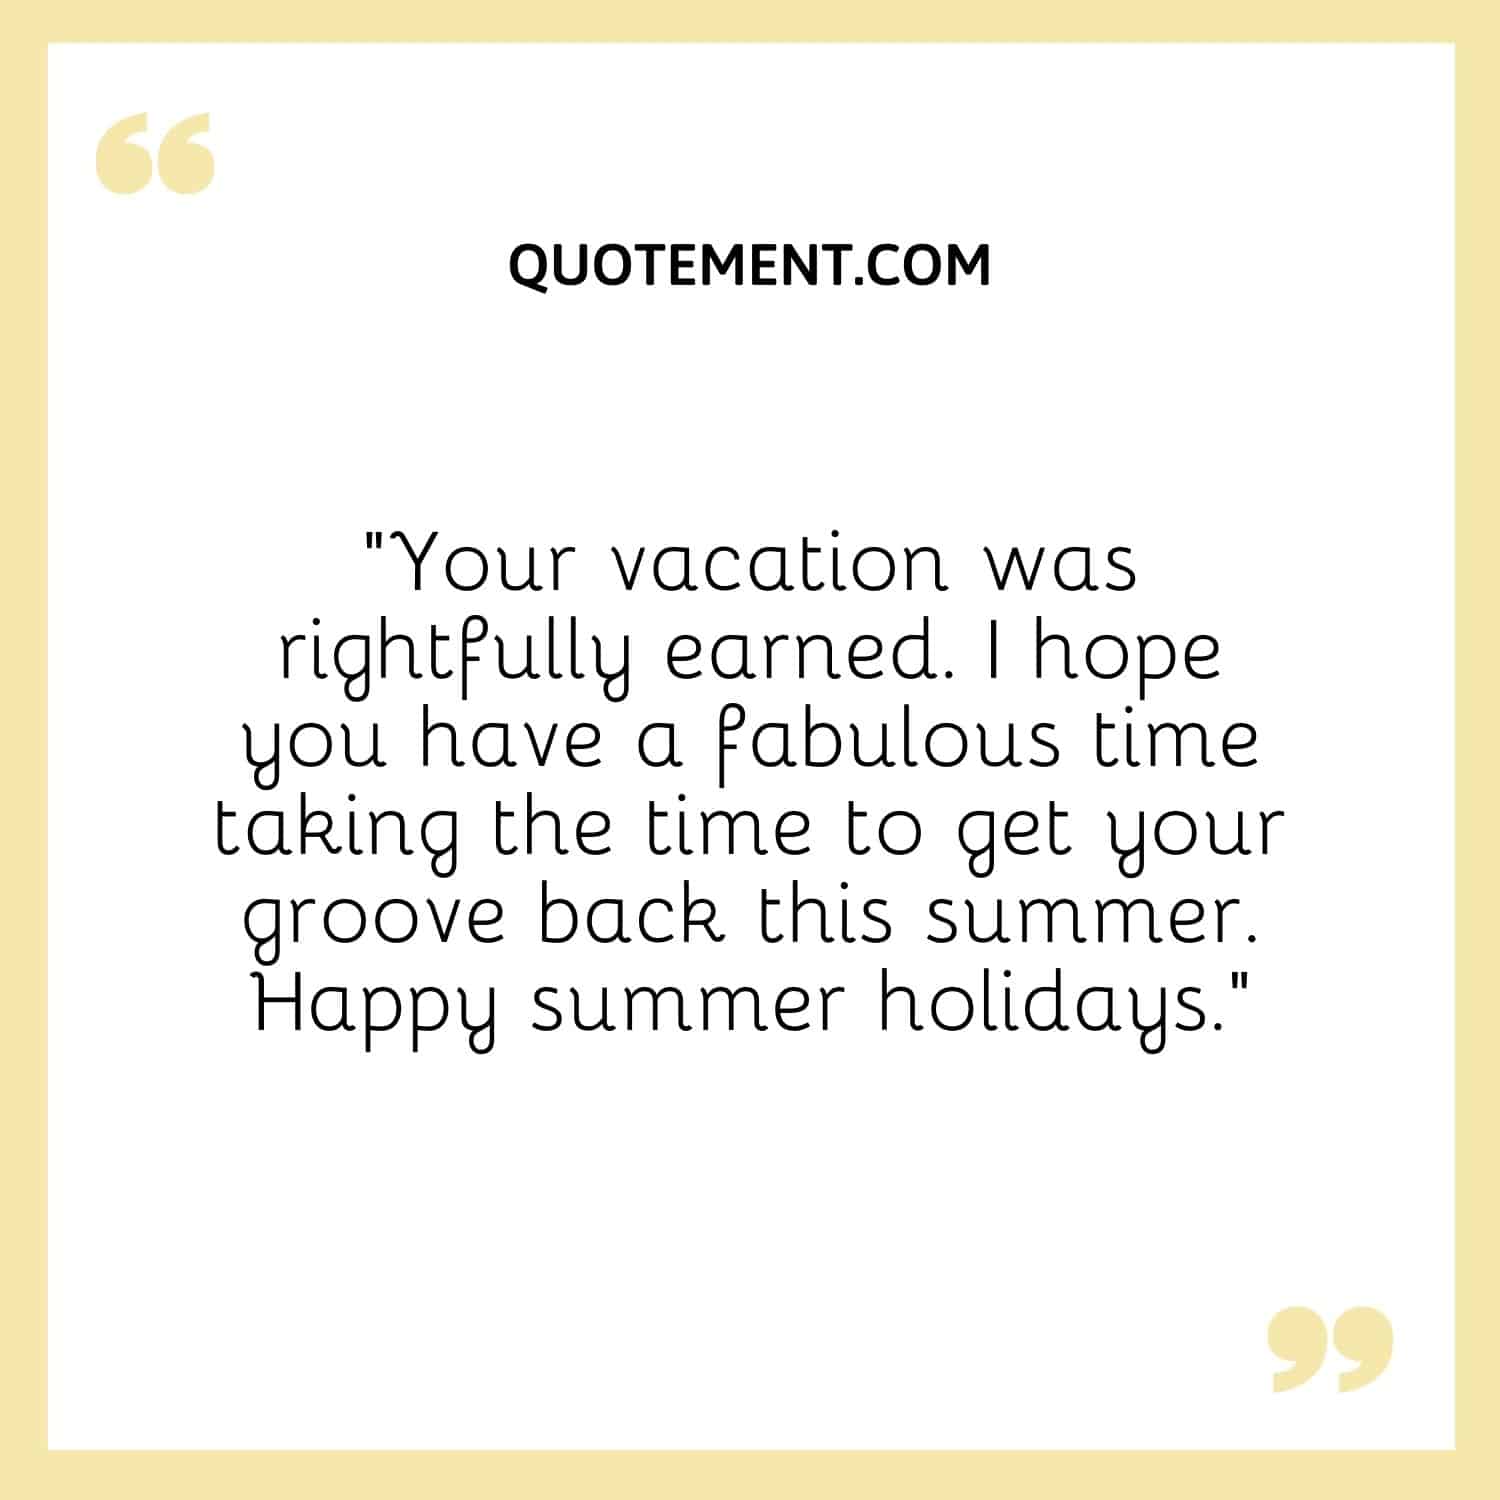 Your vacation was rightfully earned